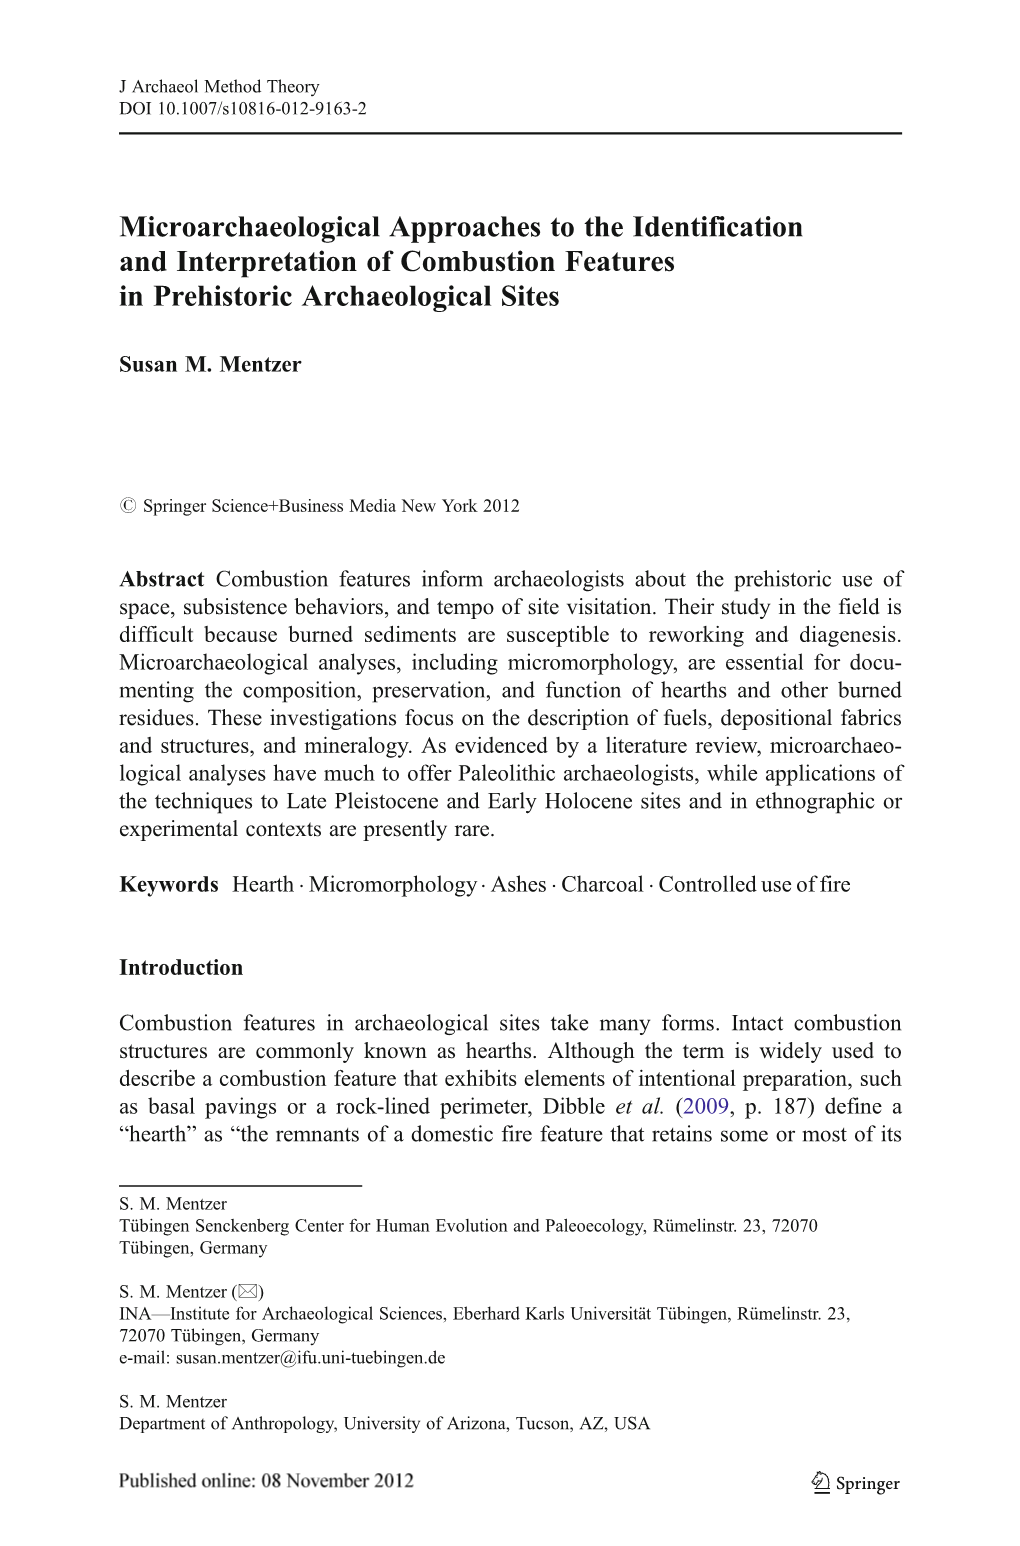 Microarchaeological Approaches to the Identification and Interpretation of Combustion Features in Prehistoric Archaeological Sites